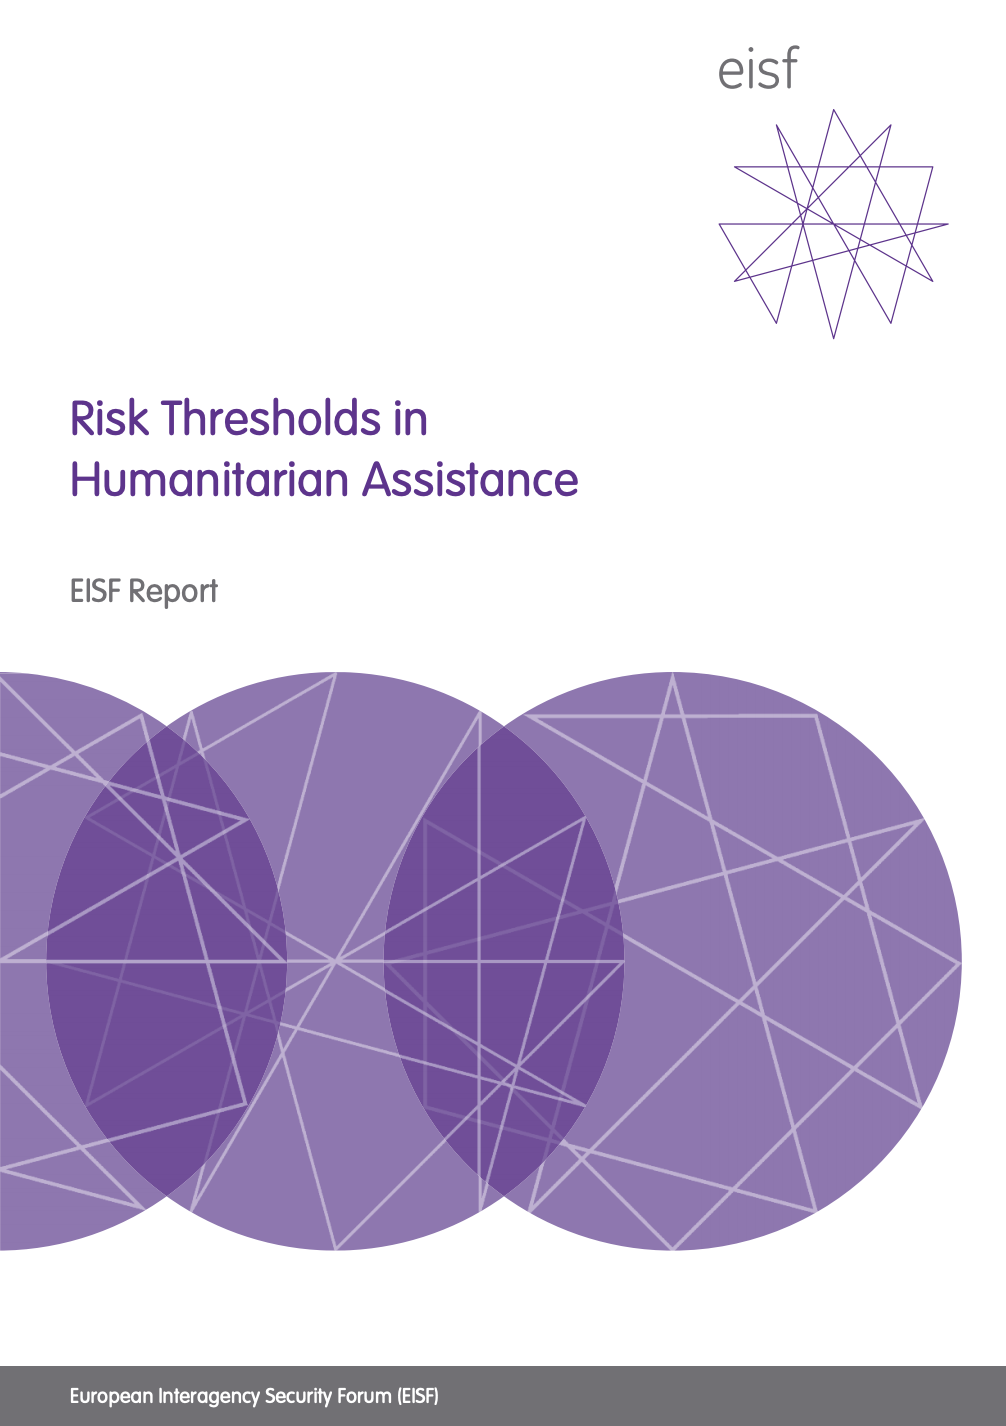 Risk Thresholds in Humanitarian Assistance